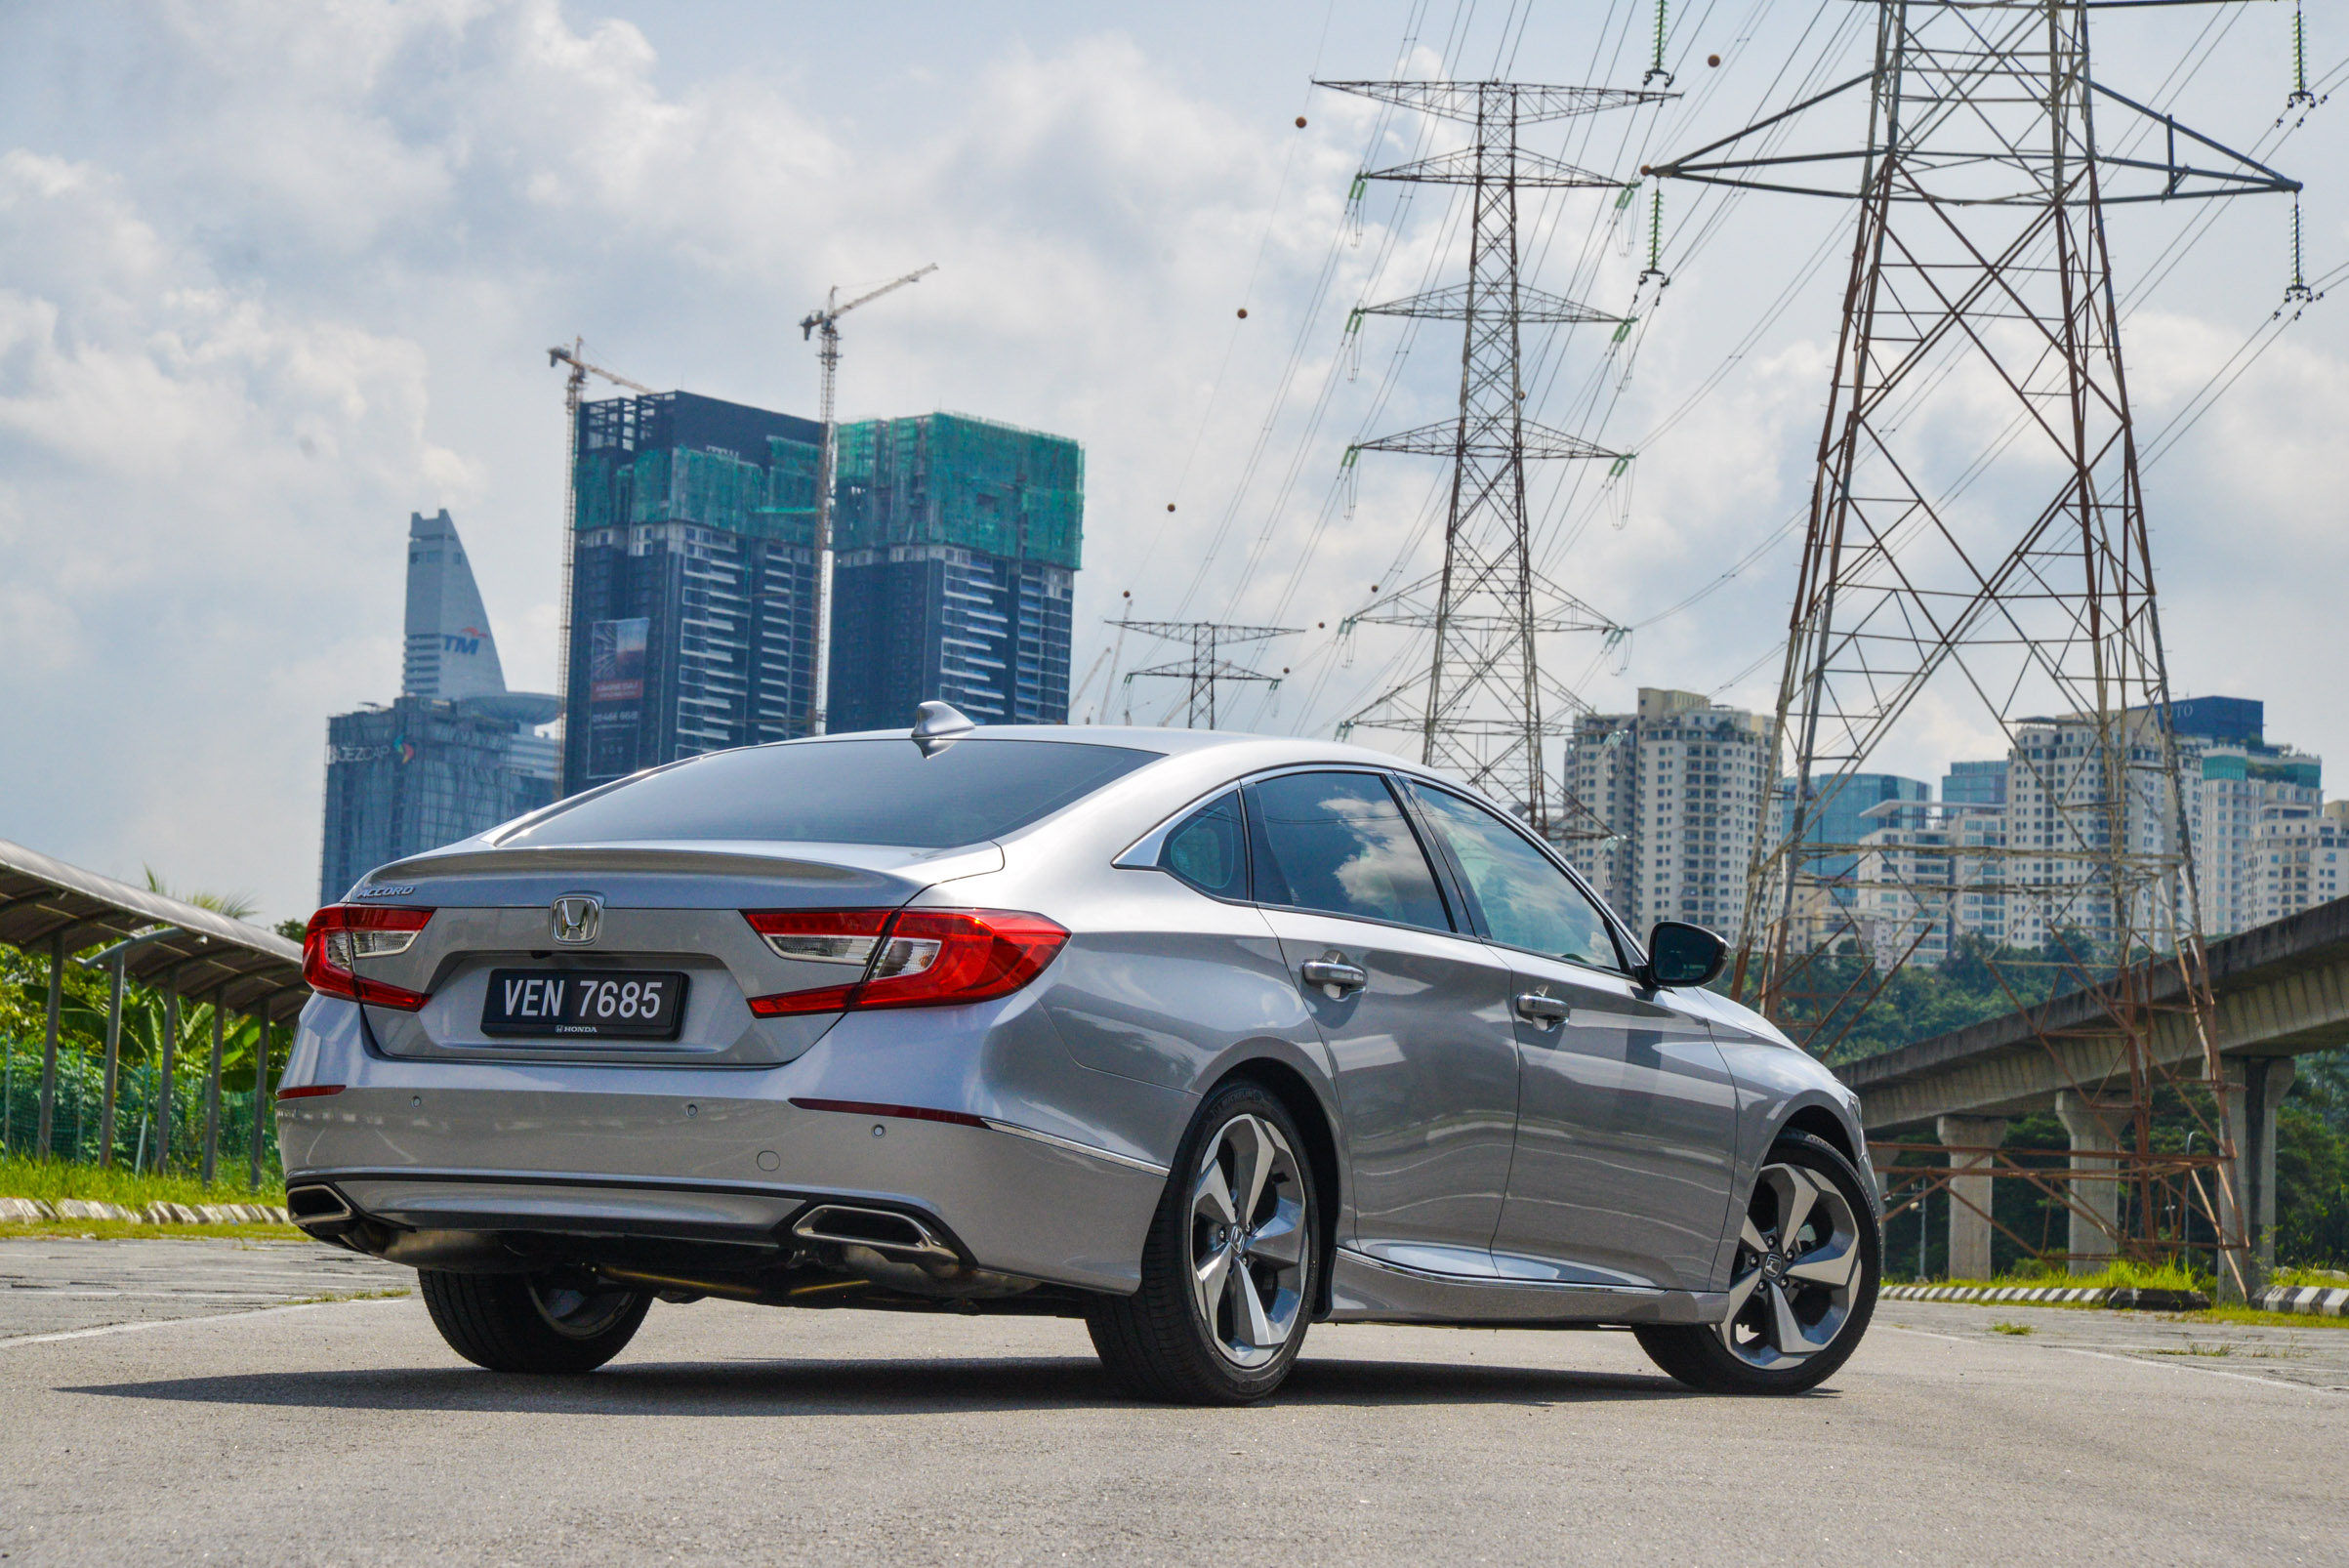 2020 Honda Accord 1.5 TC-P review: still committed to space and comfort